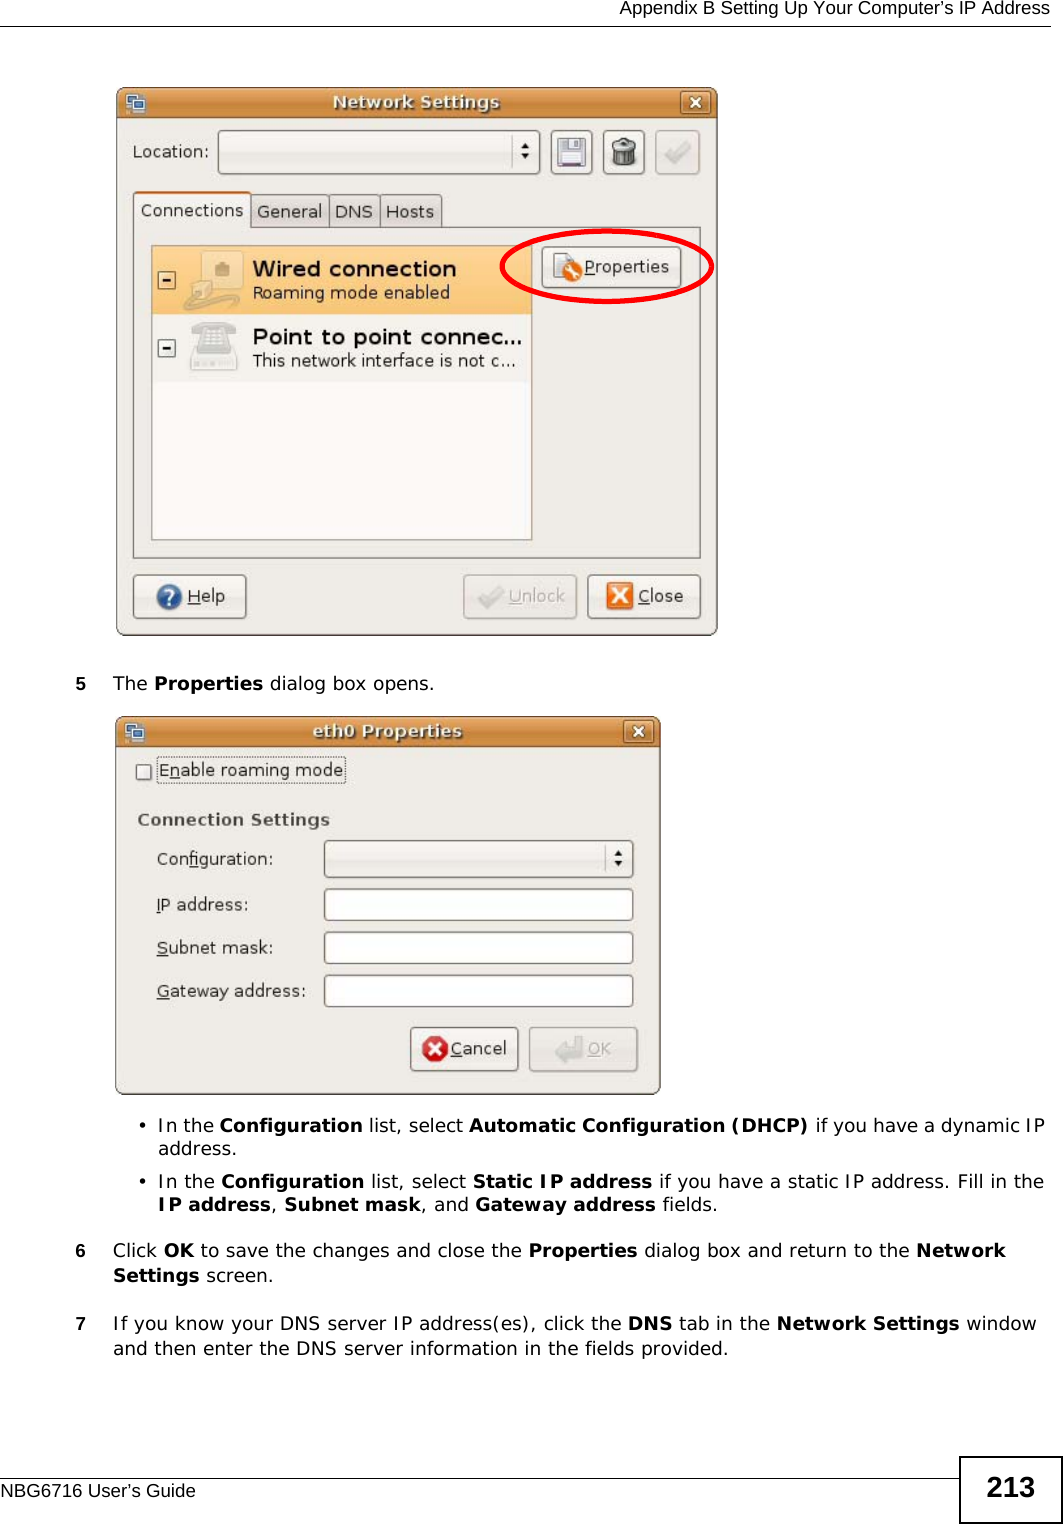  Appendix B Setting Up Your Computer’s IP AddressNBG6716 User’s Guide 2135The Properties dialog box opens.•In the Configuration list, select Automatic Configuration (DHCP) if you have a dynamic IP address.•In the Configuration list, select Static IP address if you have a static IP address. Fill in the IP address, Subnet mask, and Gateway address fields. 6Click OK to save the changes and close the Properties dialog box and return to the Network Settings screen. 7If you know your DNS server IP address(es), click the DNS tab in the Network Settings window and then enter the DNS server information in the fields provided. 